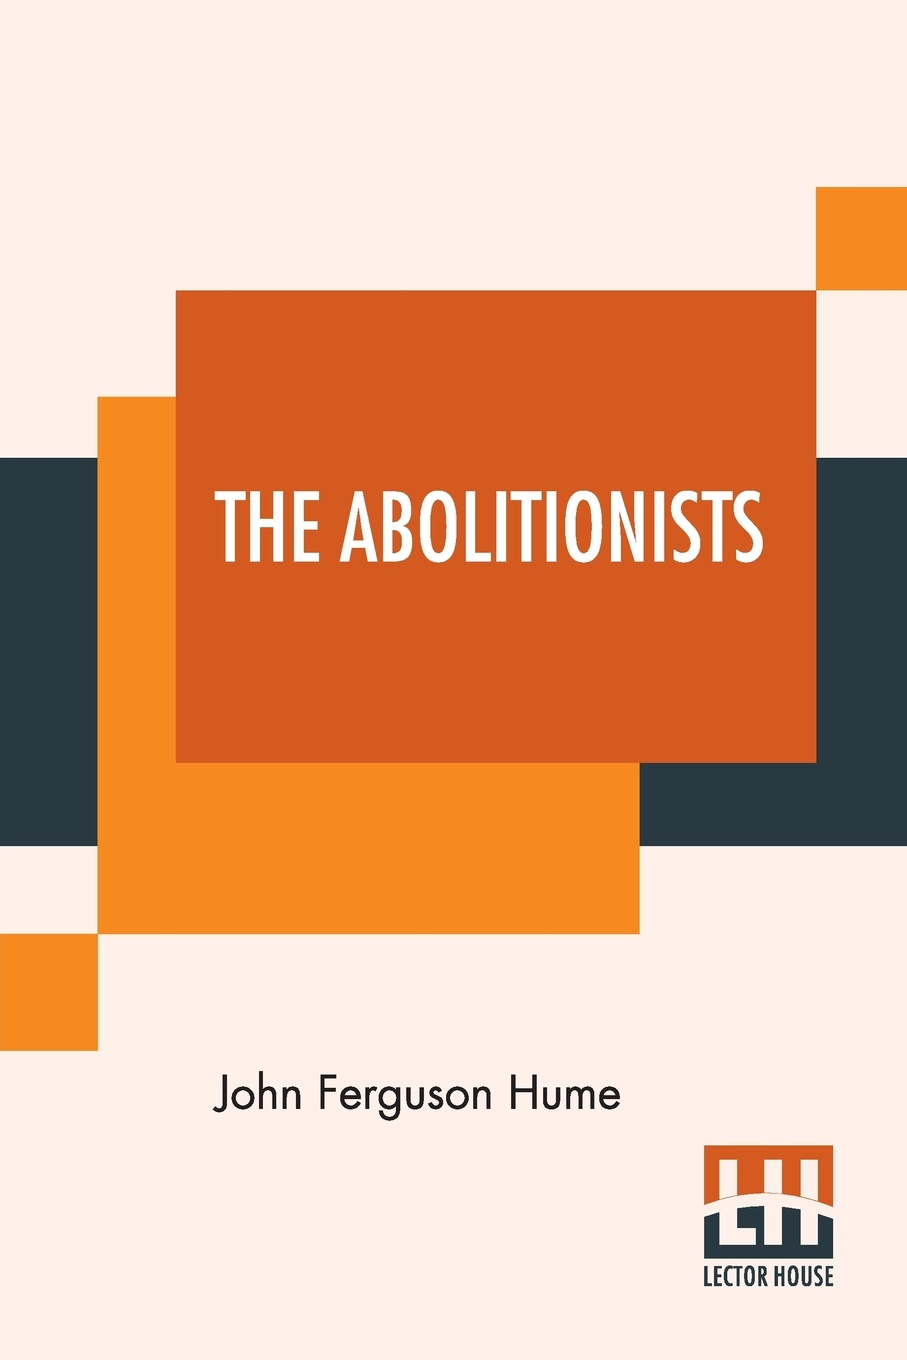 The Abolitionists. Together With Personal Memories Of The Struggle For Humanrights 1830-1864